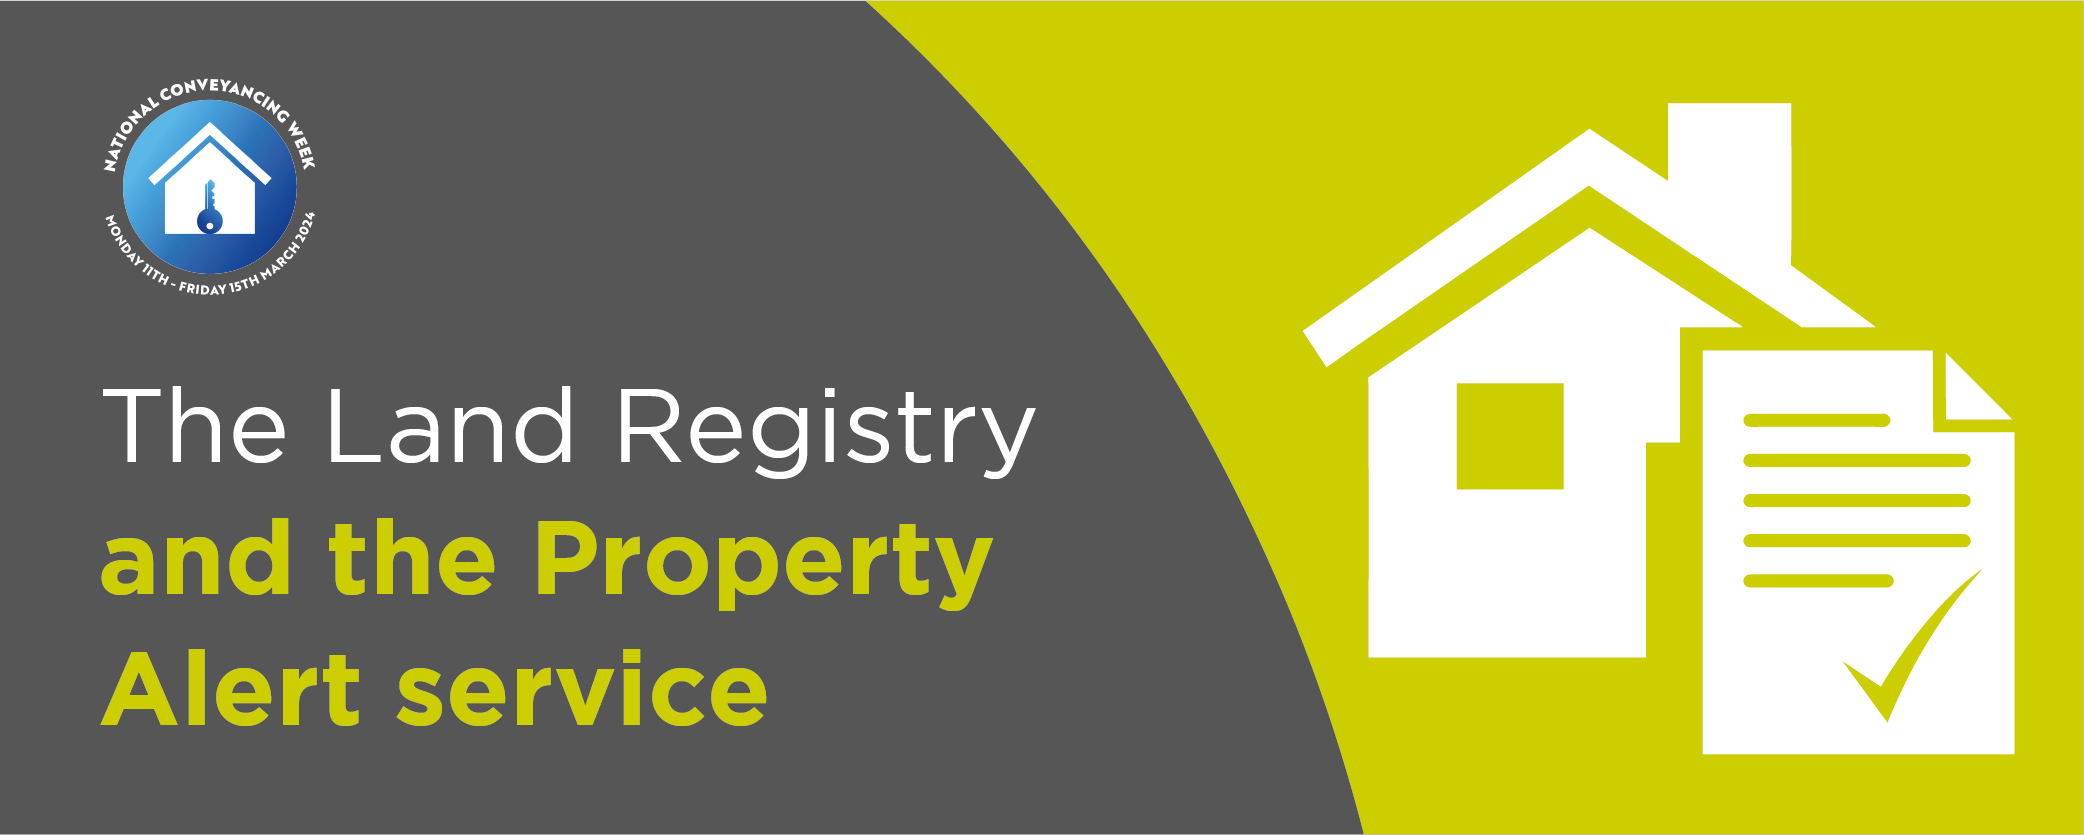 The Land Registry and the Property Alert service